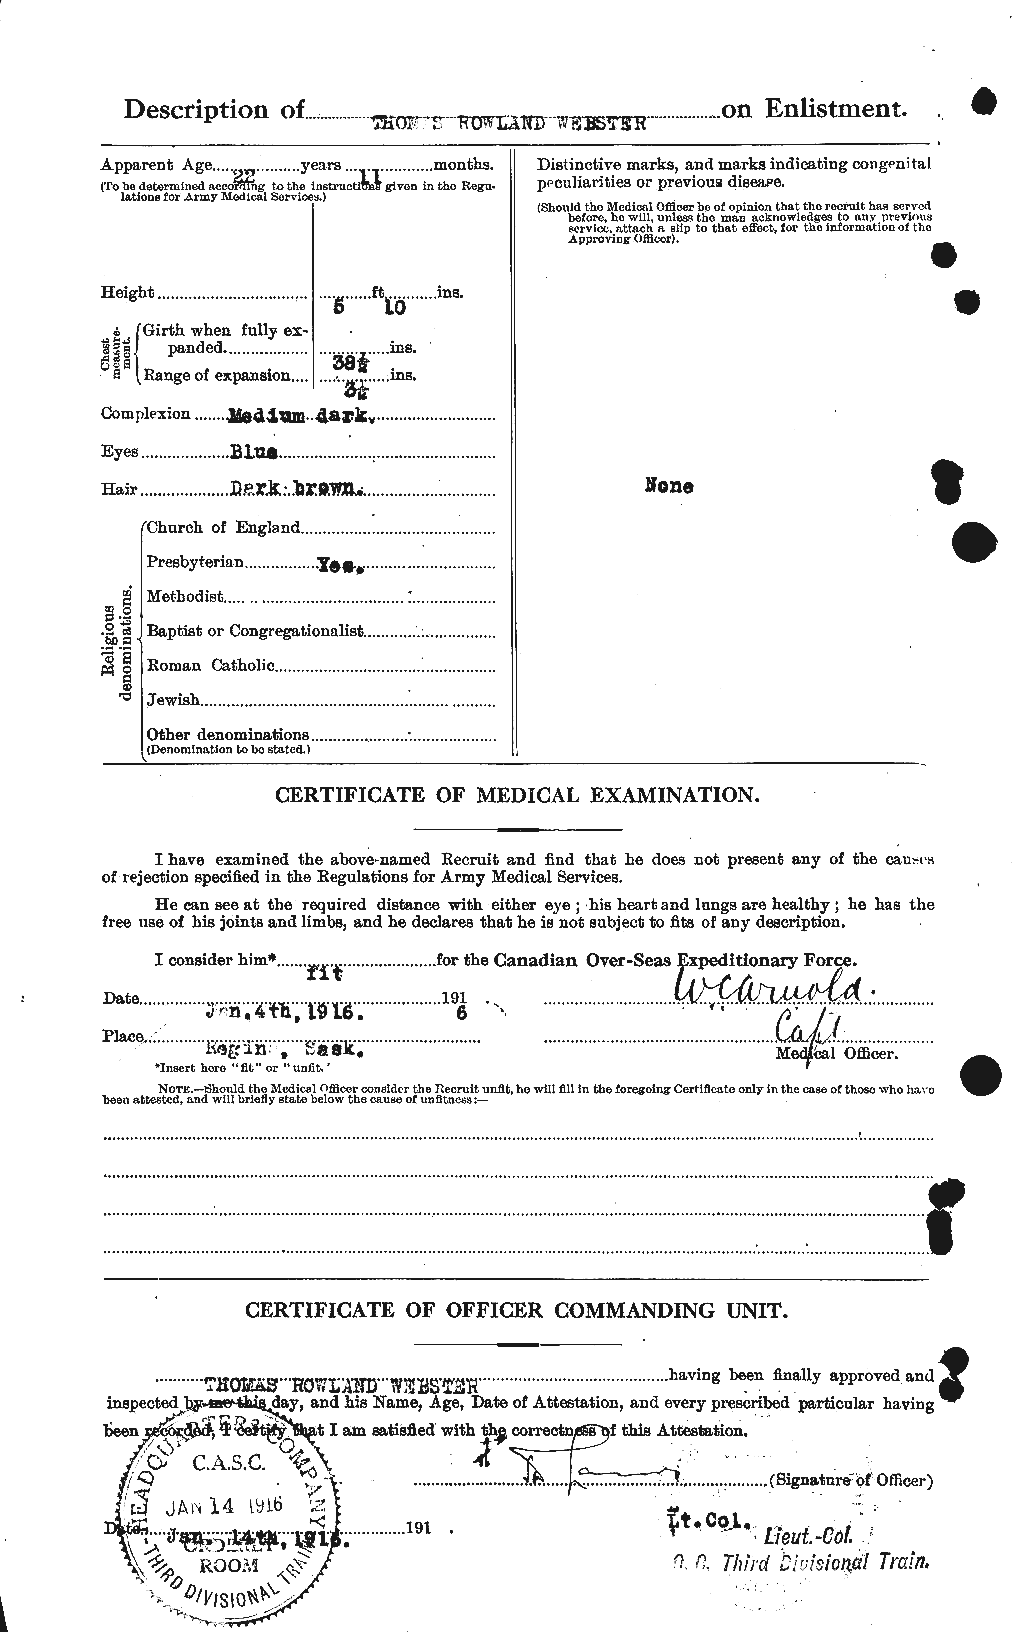 Personnel Records of the First World War - CEF 661996b